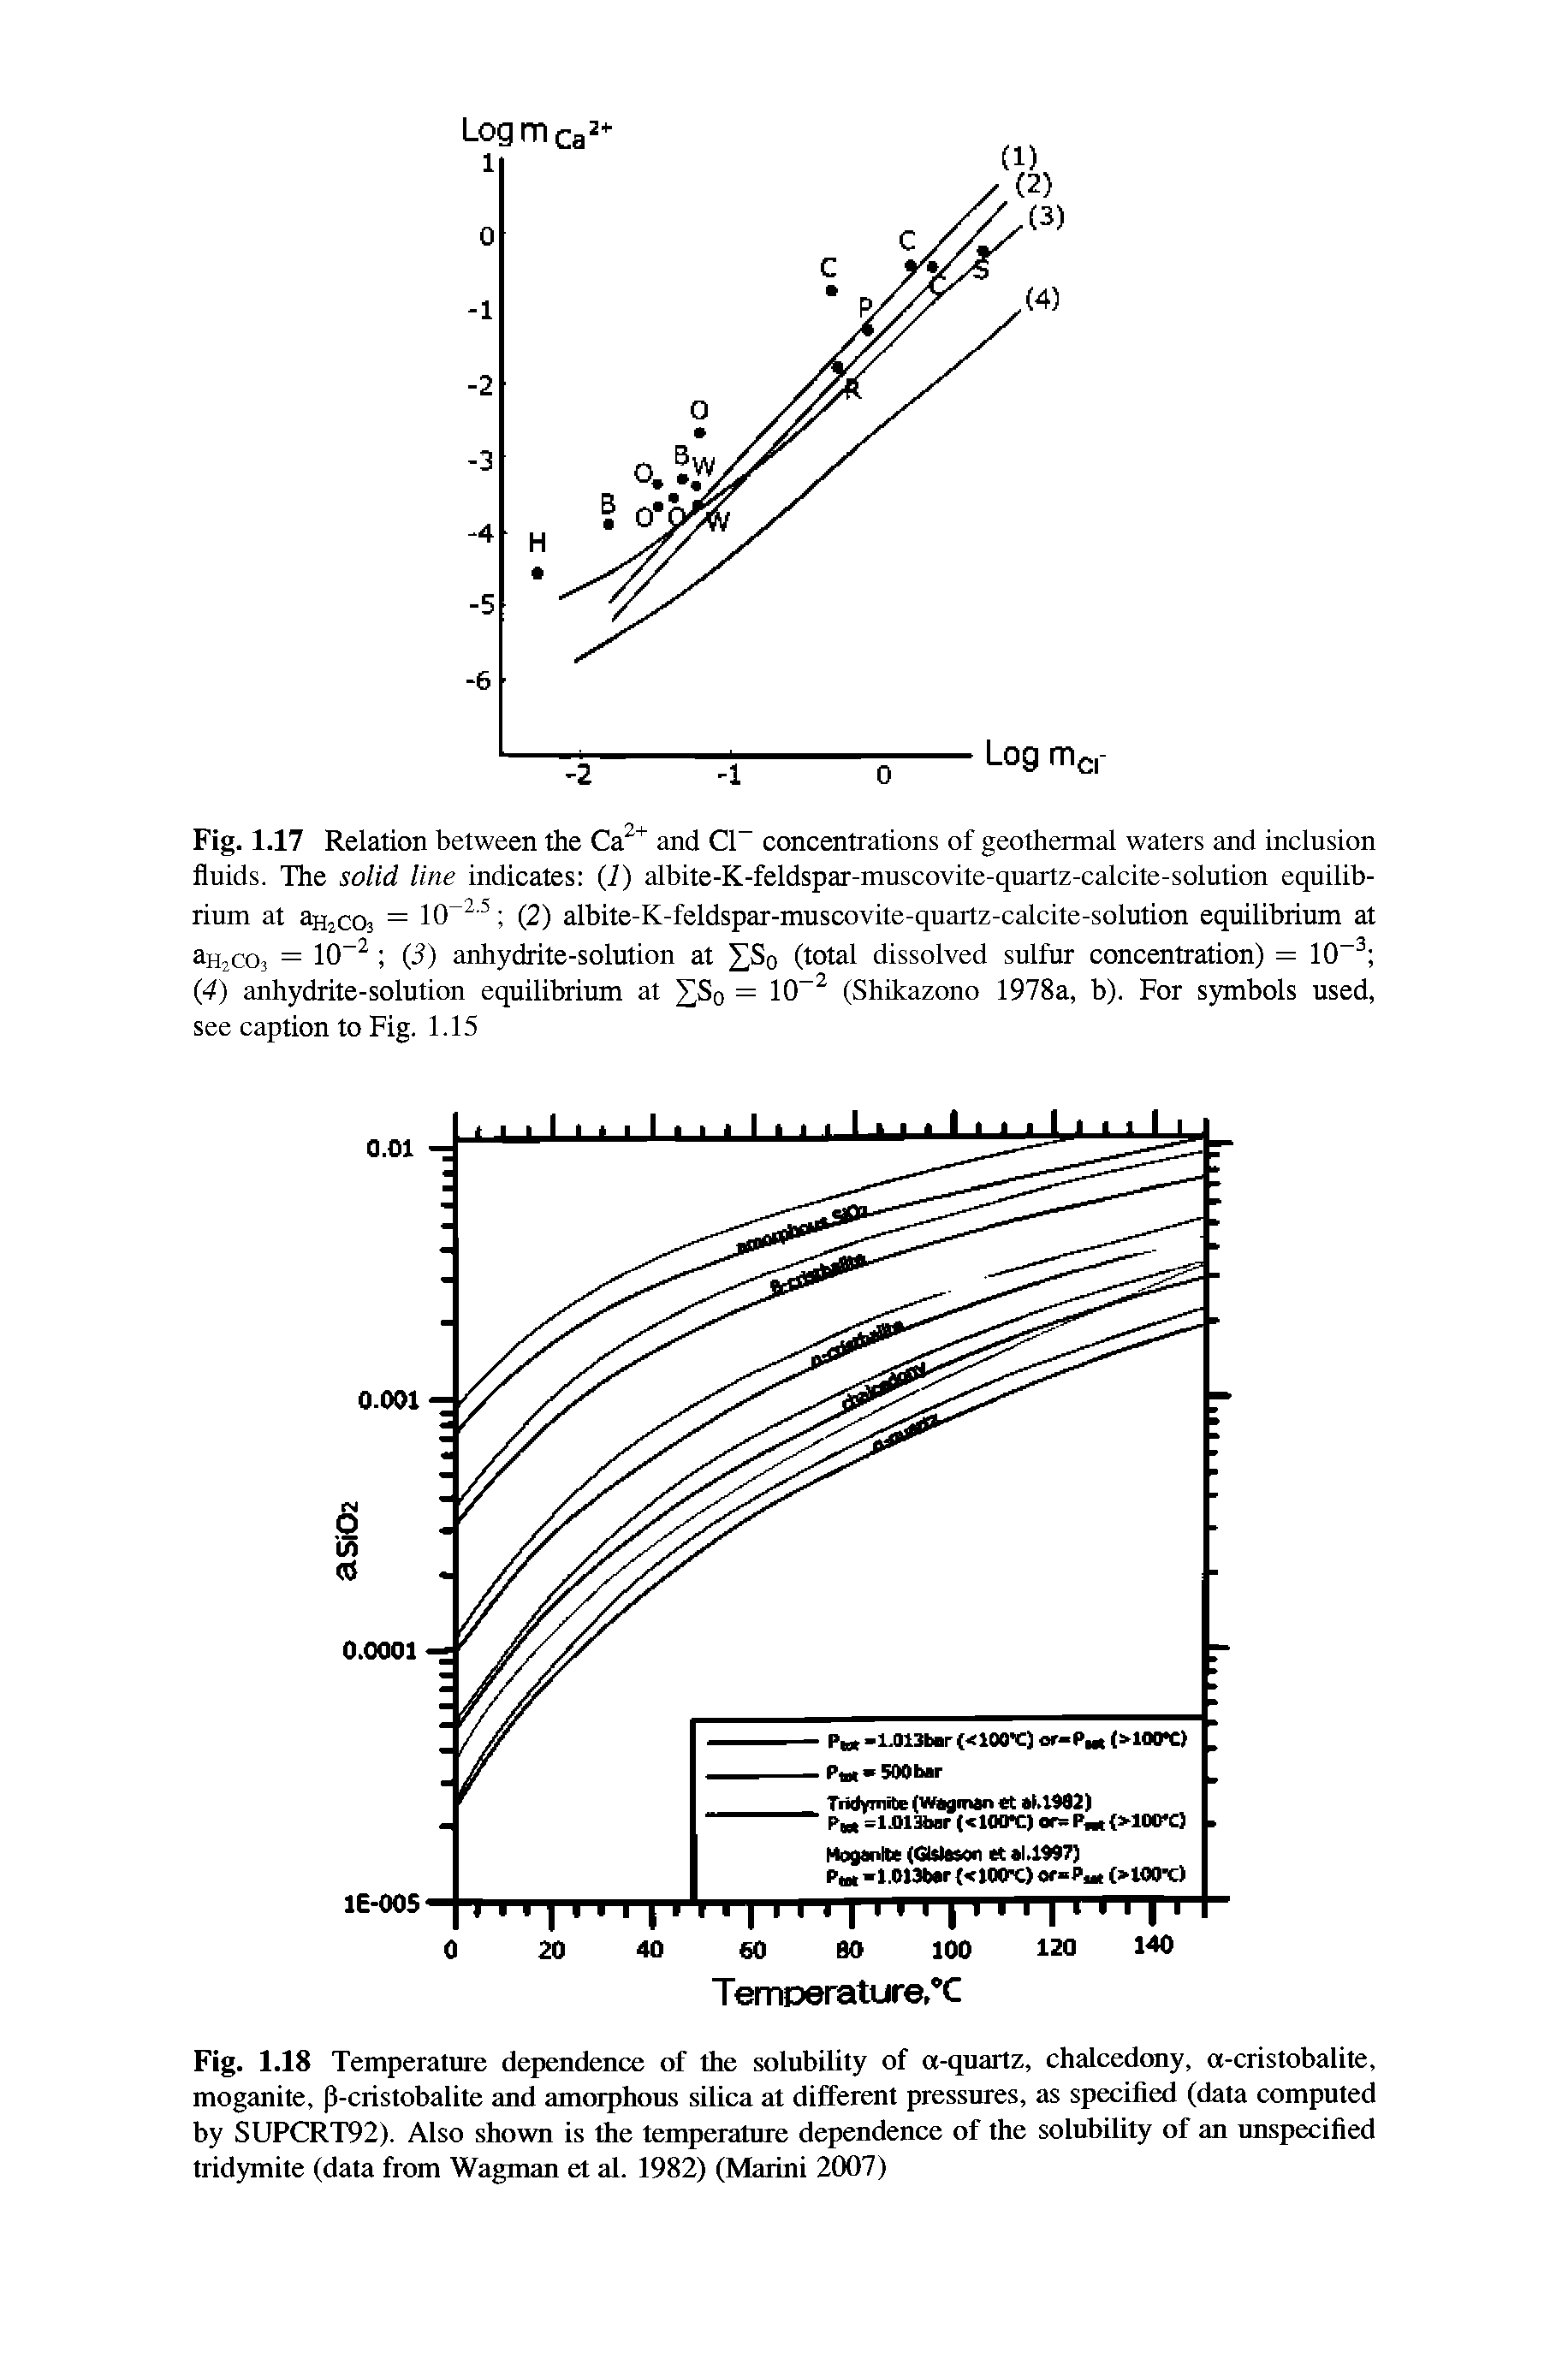 Fig. 1.17 Relation between the and Cl concentrations of geothermal waters and inclusion fluids. The solid line indicates (i) albite-K-feldspar-muscovite-quartz-calcite-solution equilibrium at aHjCOj = 10 (2) albite-K-feldspar-muscovite-quartz-calcite-solution equilibrium at aHjCO, = 10 (3) anhydrite-solution at XSo (total dissolved sulfur concentration) = 10 (4) anhydrite-solution equilibrium at = 10 (Shikazono 1978a, b). For symbols used, see caption to Fig. 1.15...